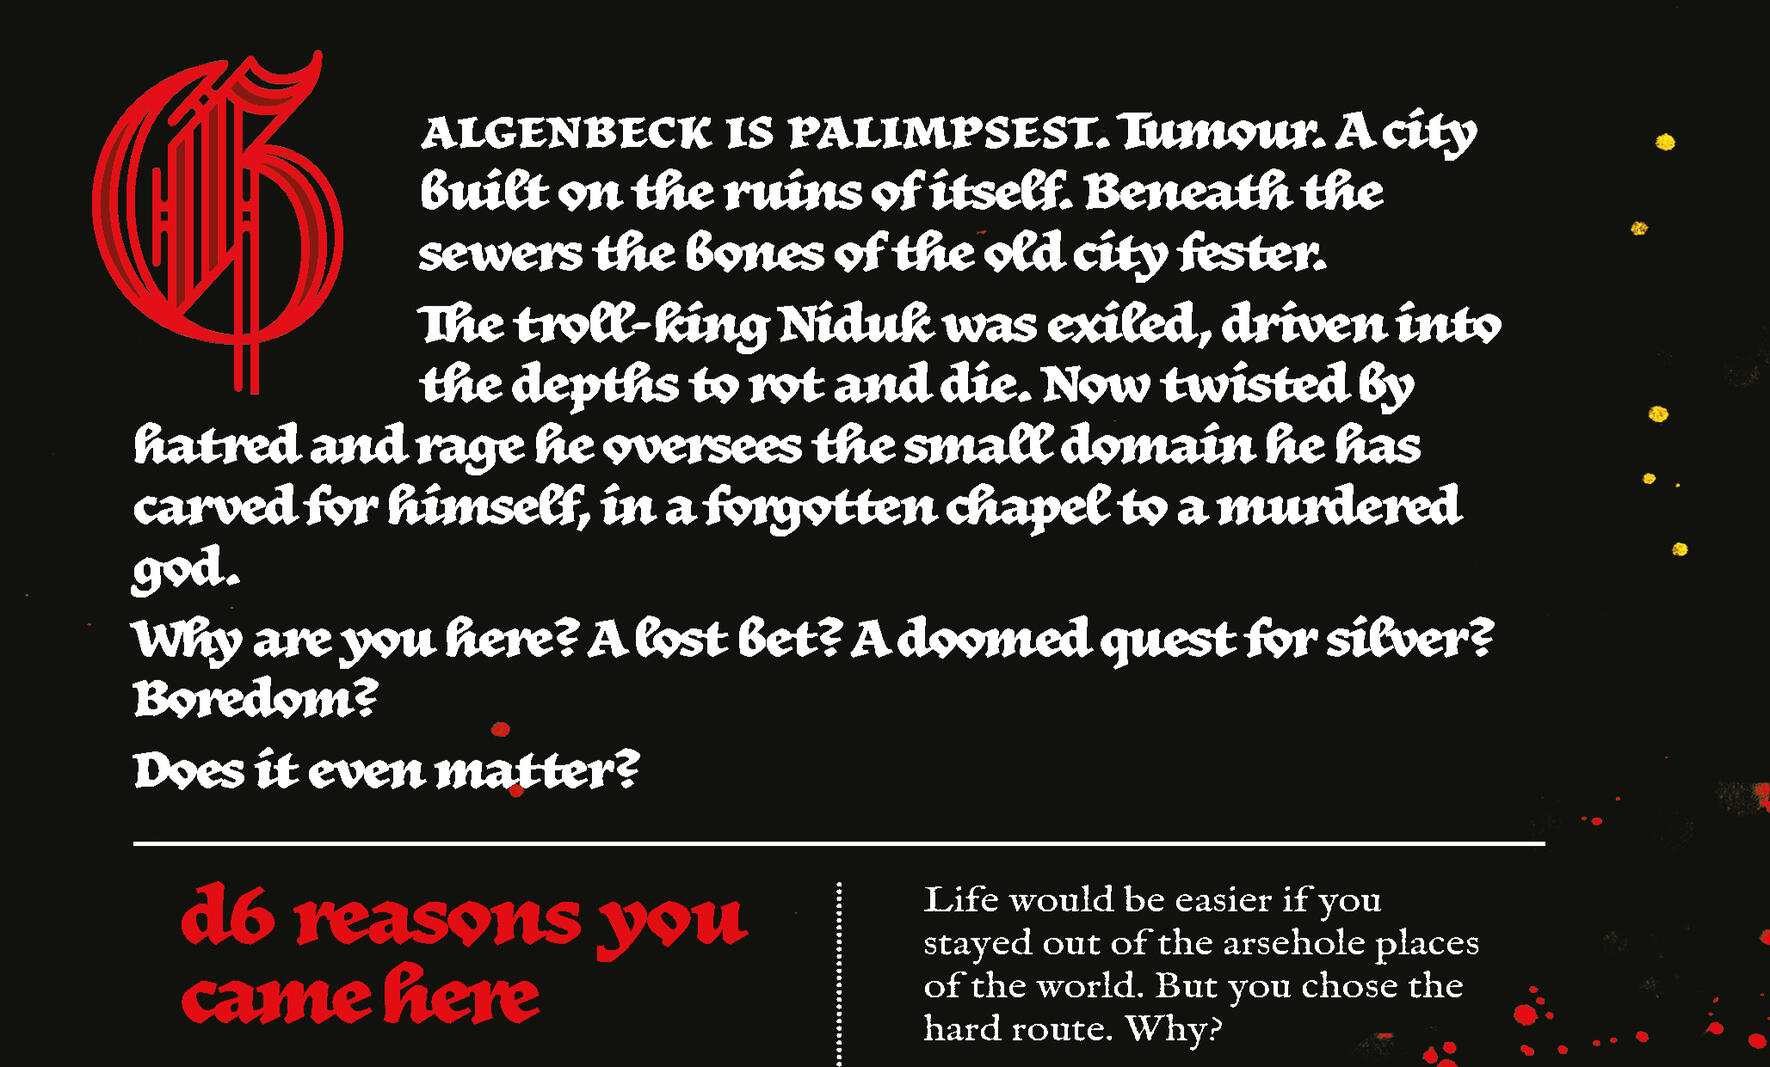 A screenshot of the text in layout, taken from Nephews In Peril.